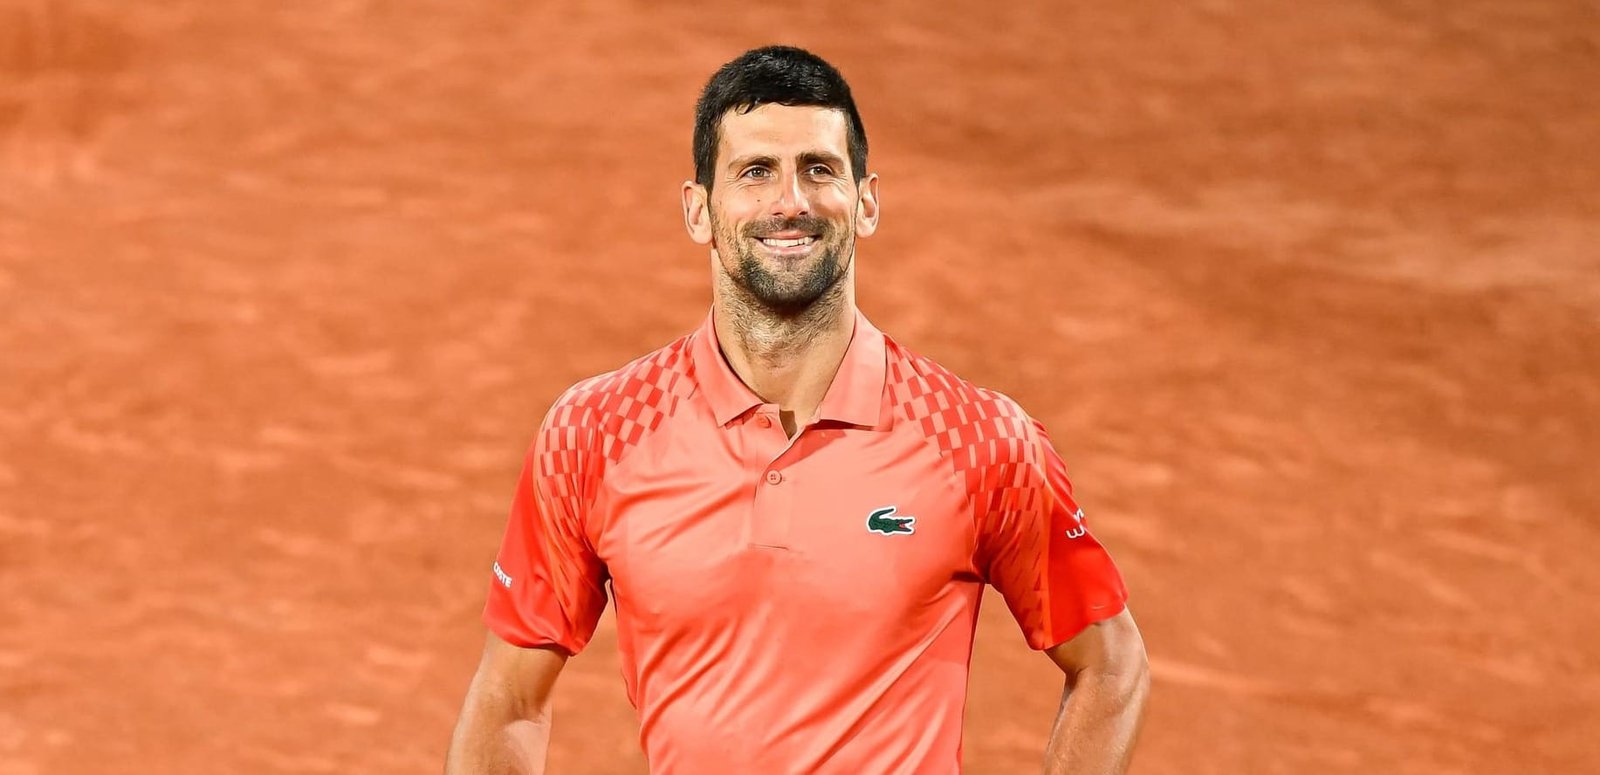 Novak Djokovic Voices Concern Over the Future of Tennis With Pickleball Gaining Ground